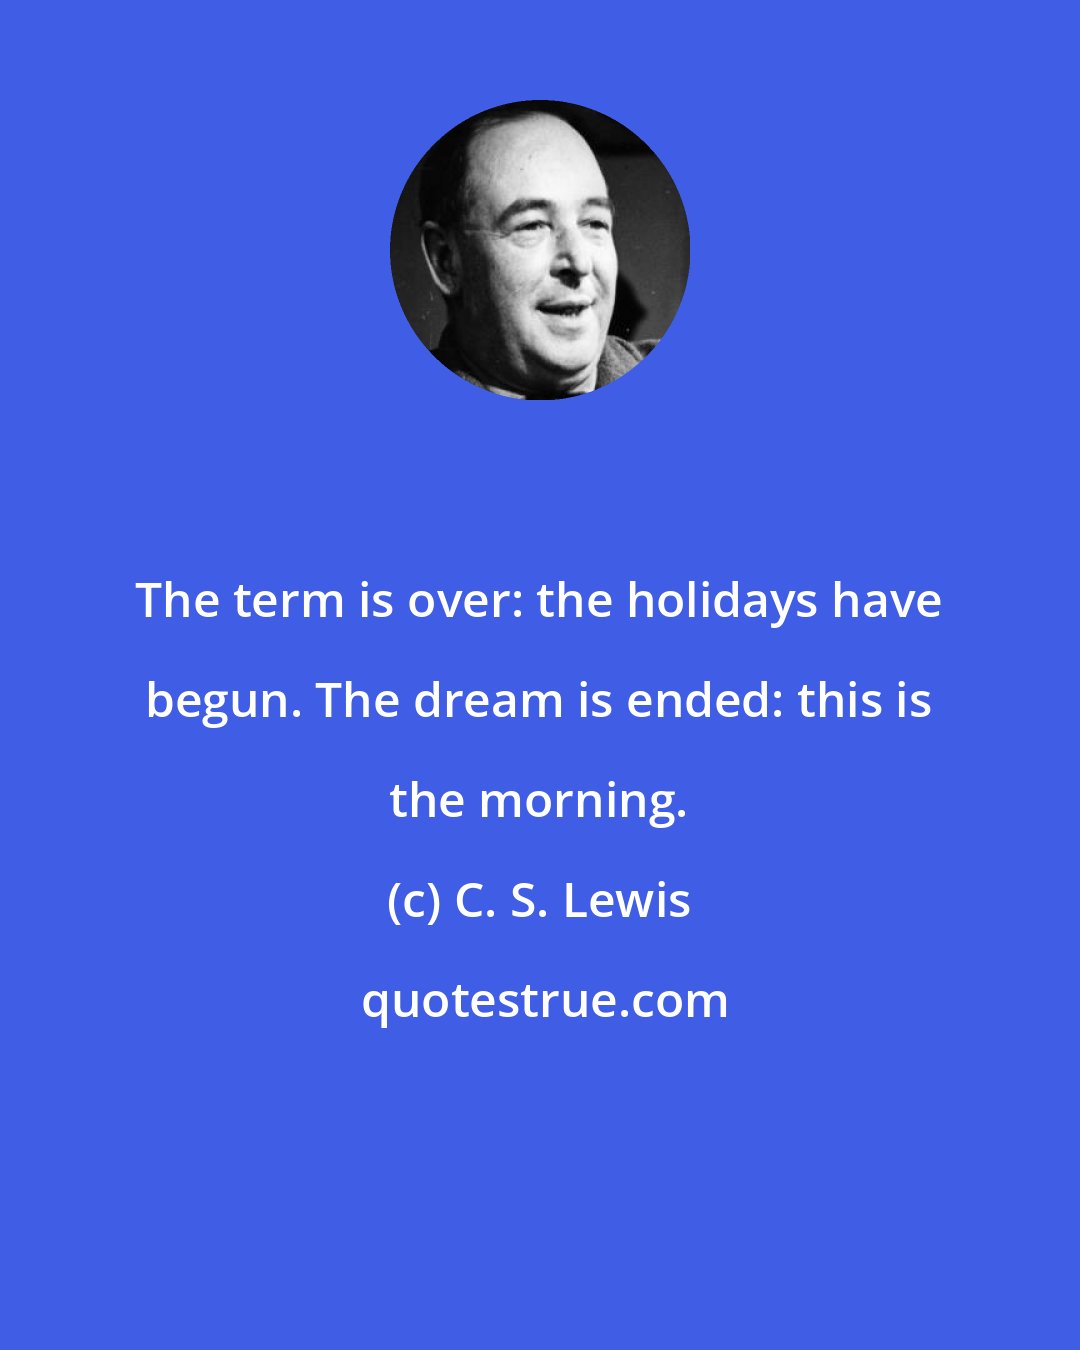 C. S. Lewis: The term is over: the holidays have begun. The dream is ended: this is the morning.